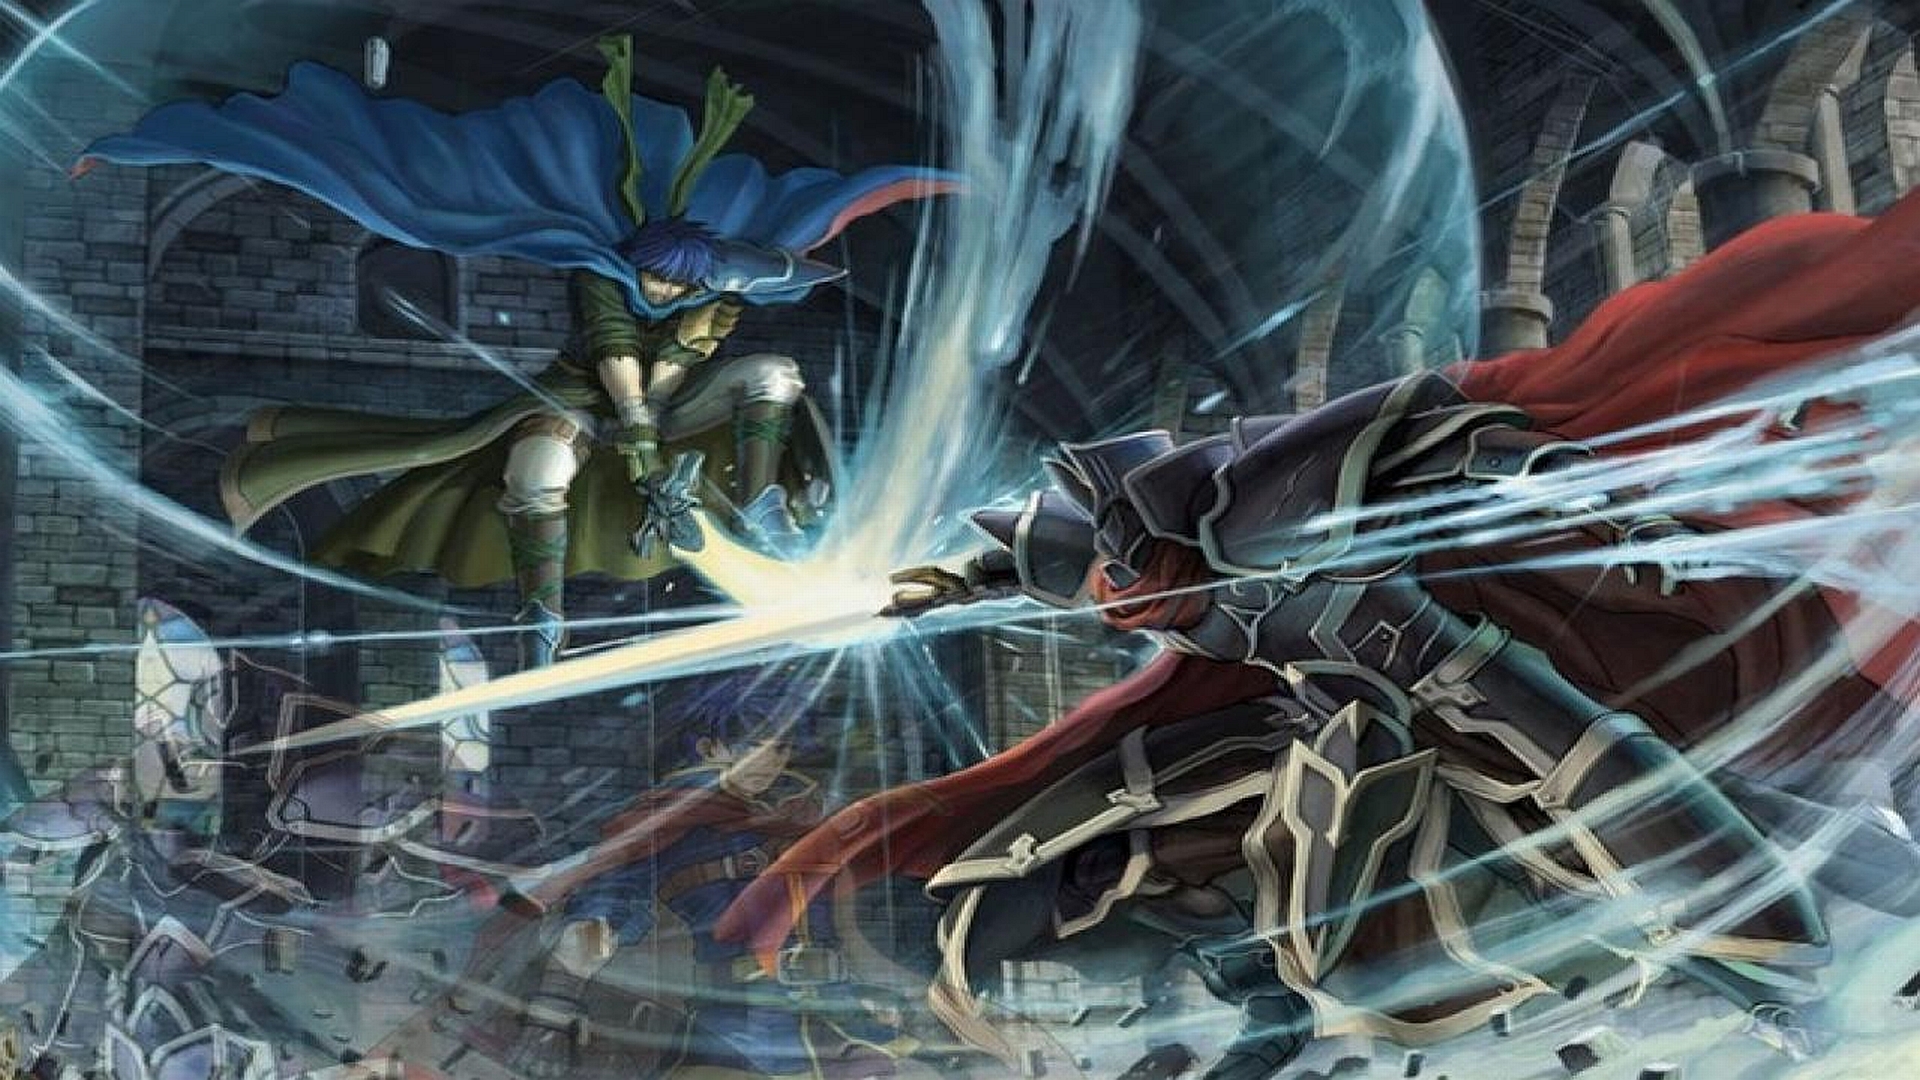 Battle between Ike and Black Knight from Fire Emblem game series.